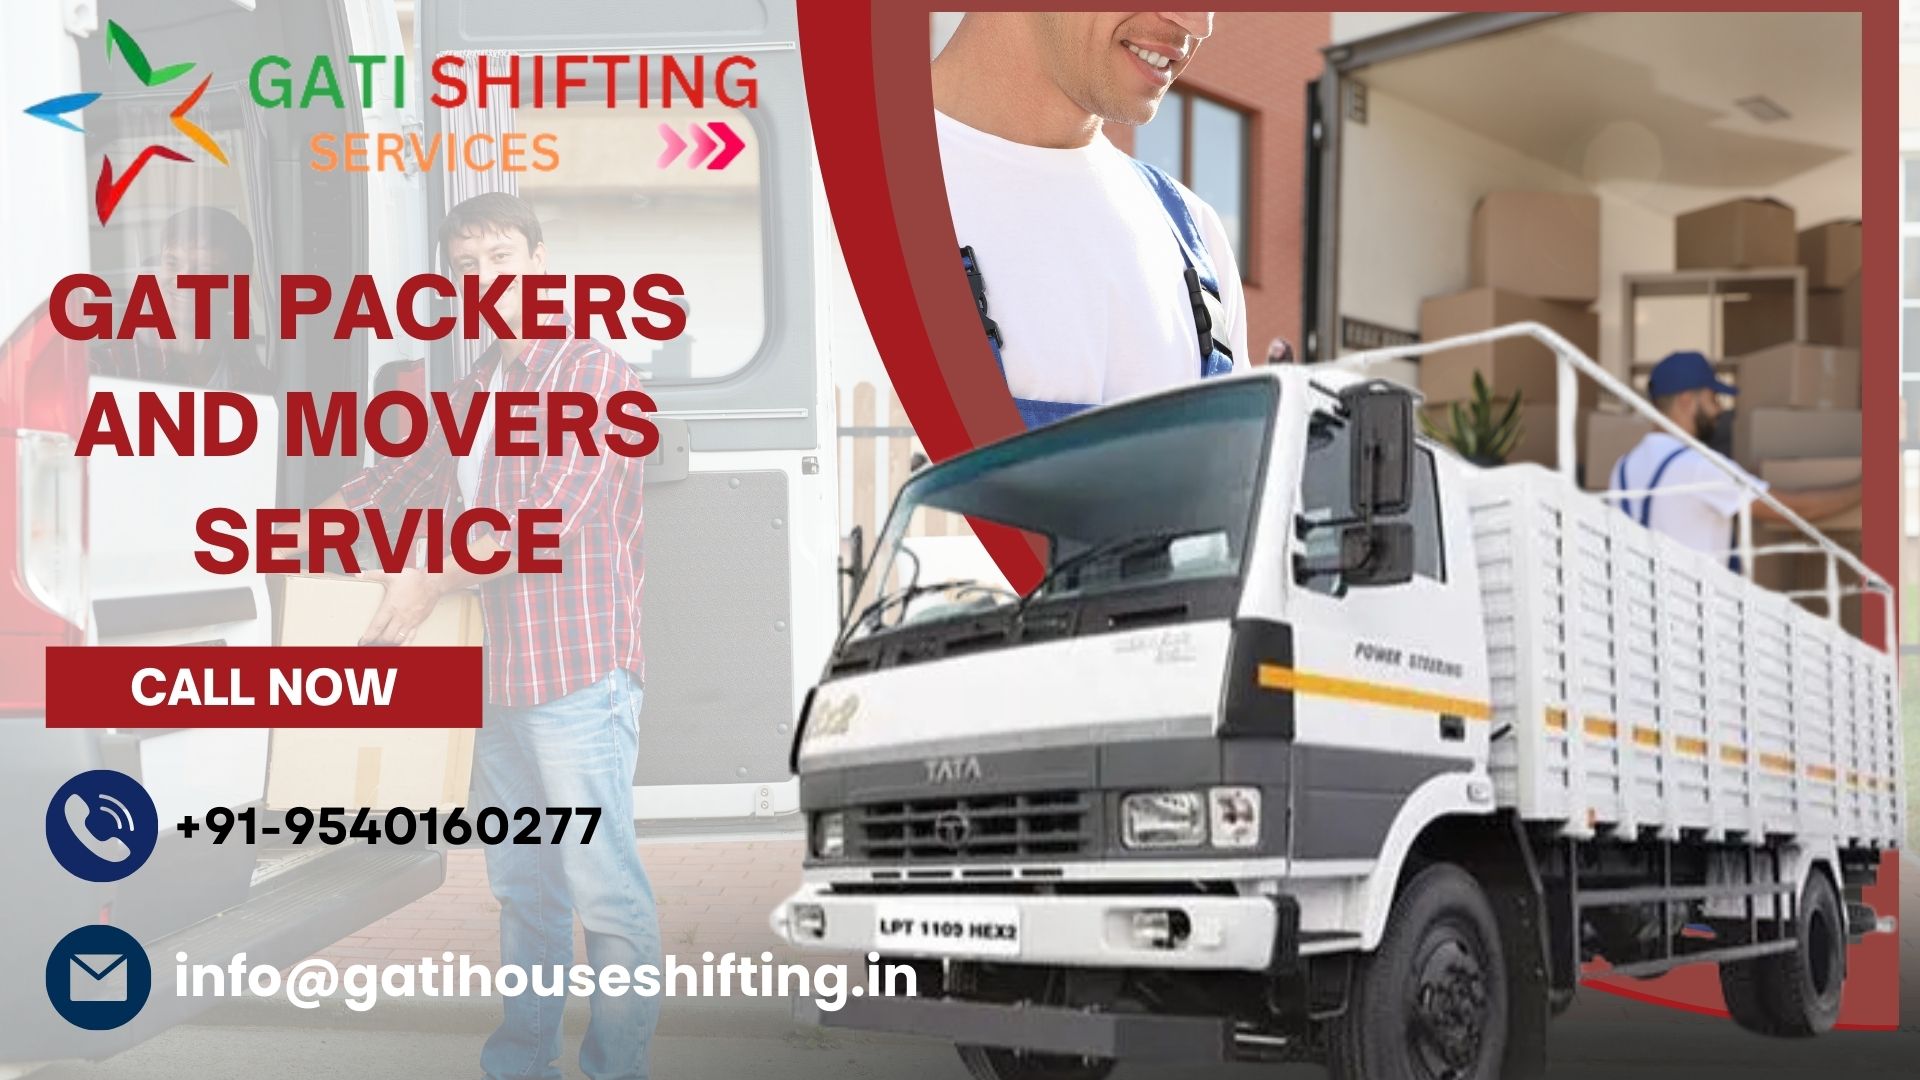 Best Gati Packers and Movers in Visakhapatnam Call 9540160277